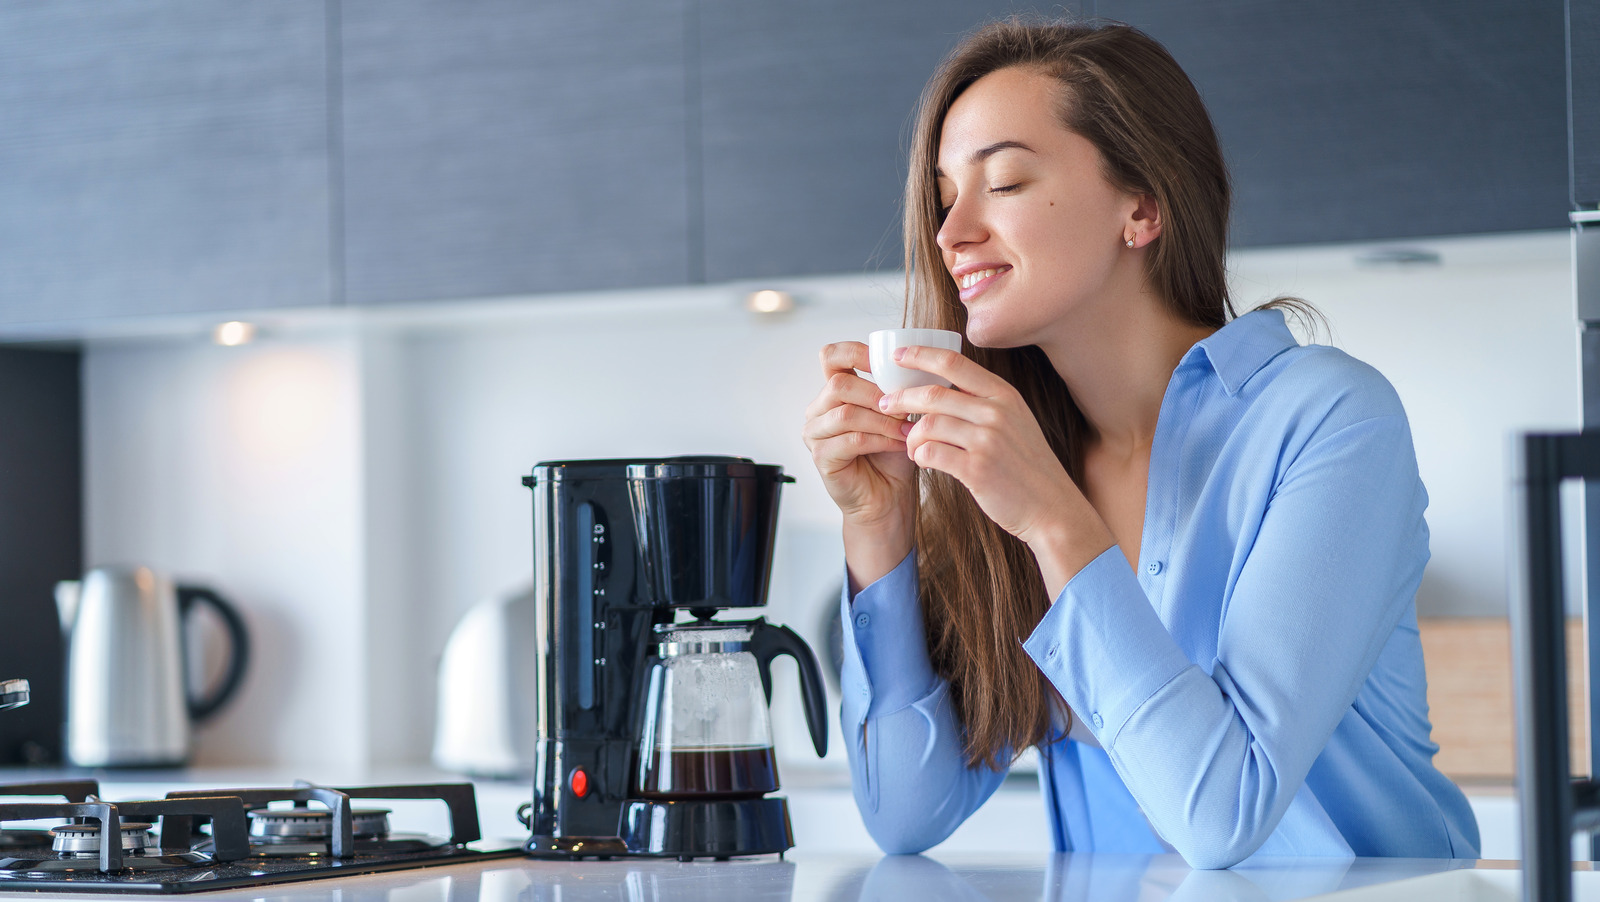 How To Clean A Coffee Maker The Easy Way